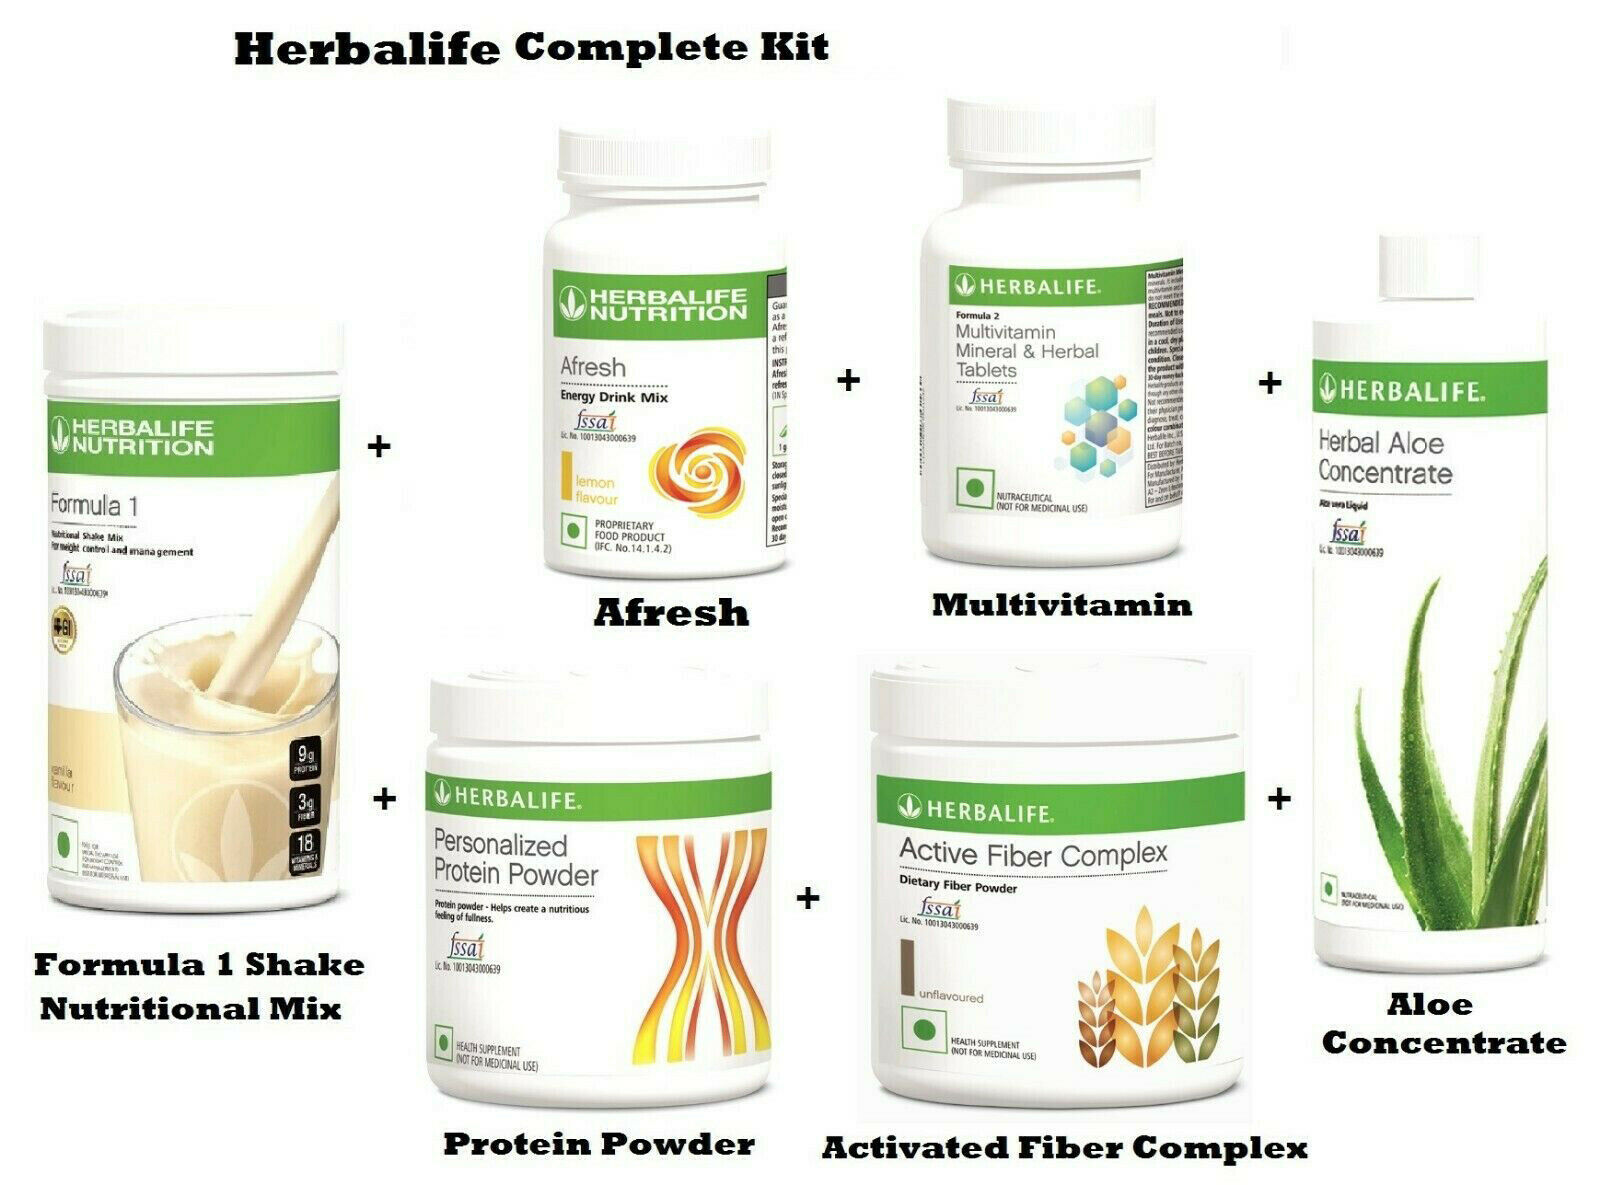 HERBALIFE Complete Weight Management Kit Free Shipping - $146.49